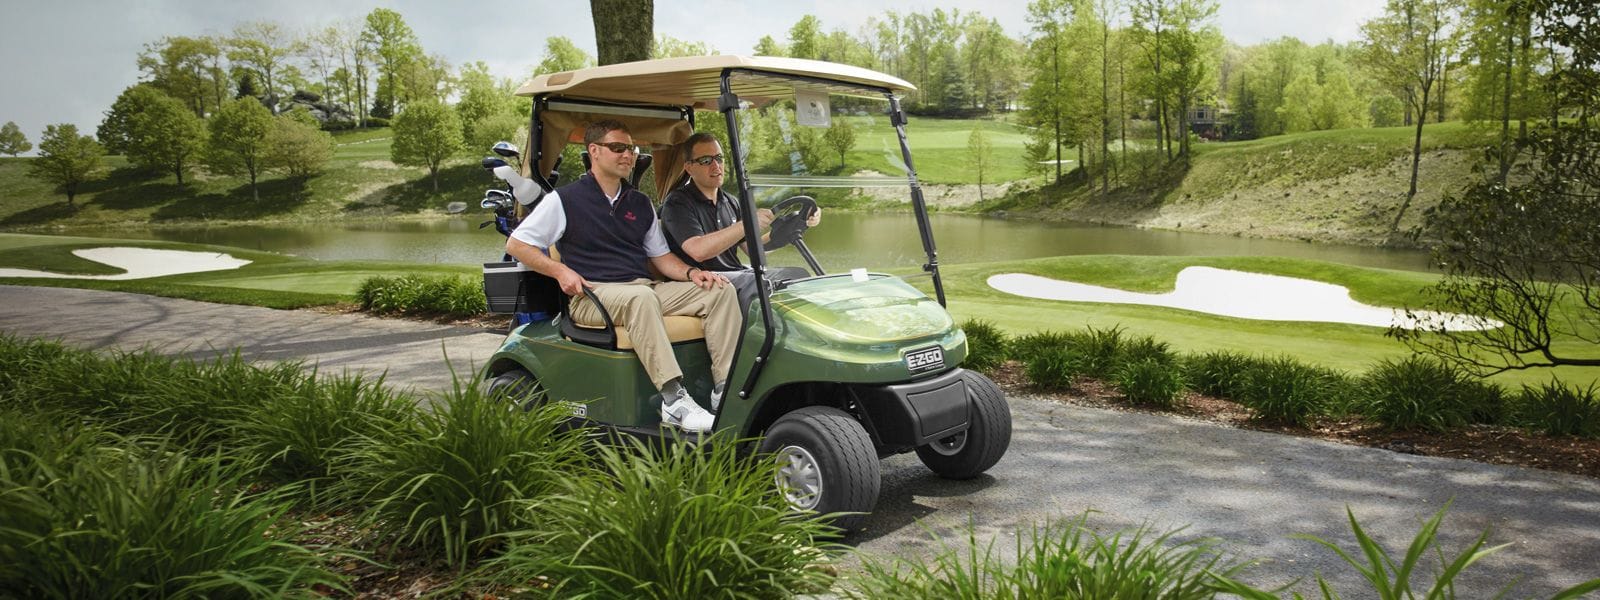 Augusta Golf & Utility Cars are the master distributor of E-Z-GO products